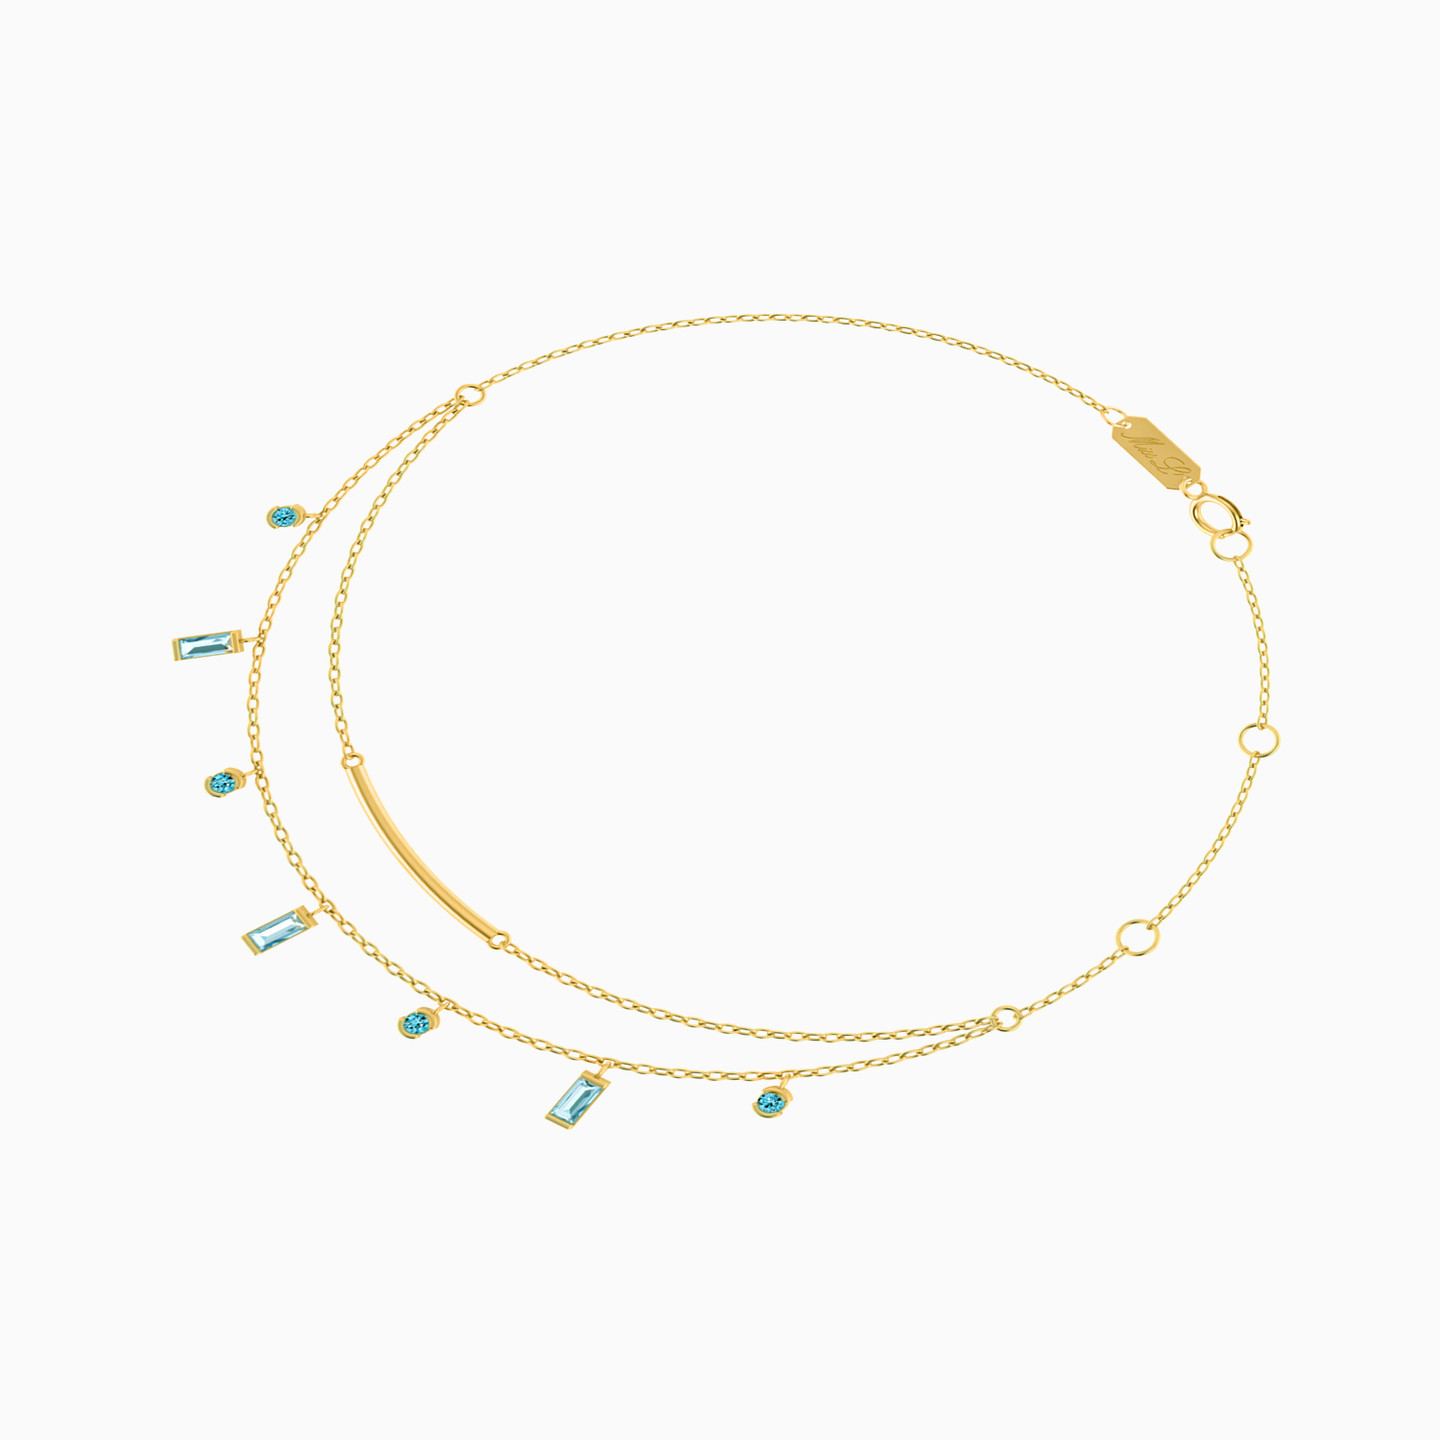 18K Gold Colored Stones Chain Anklet - 2